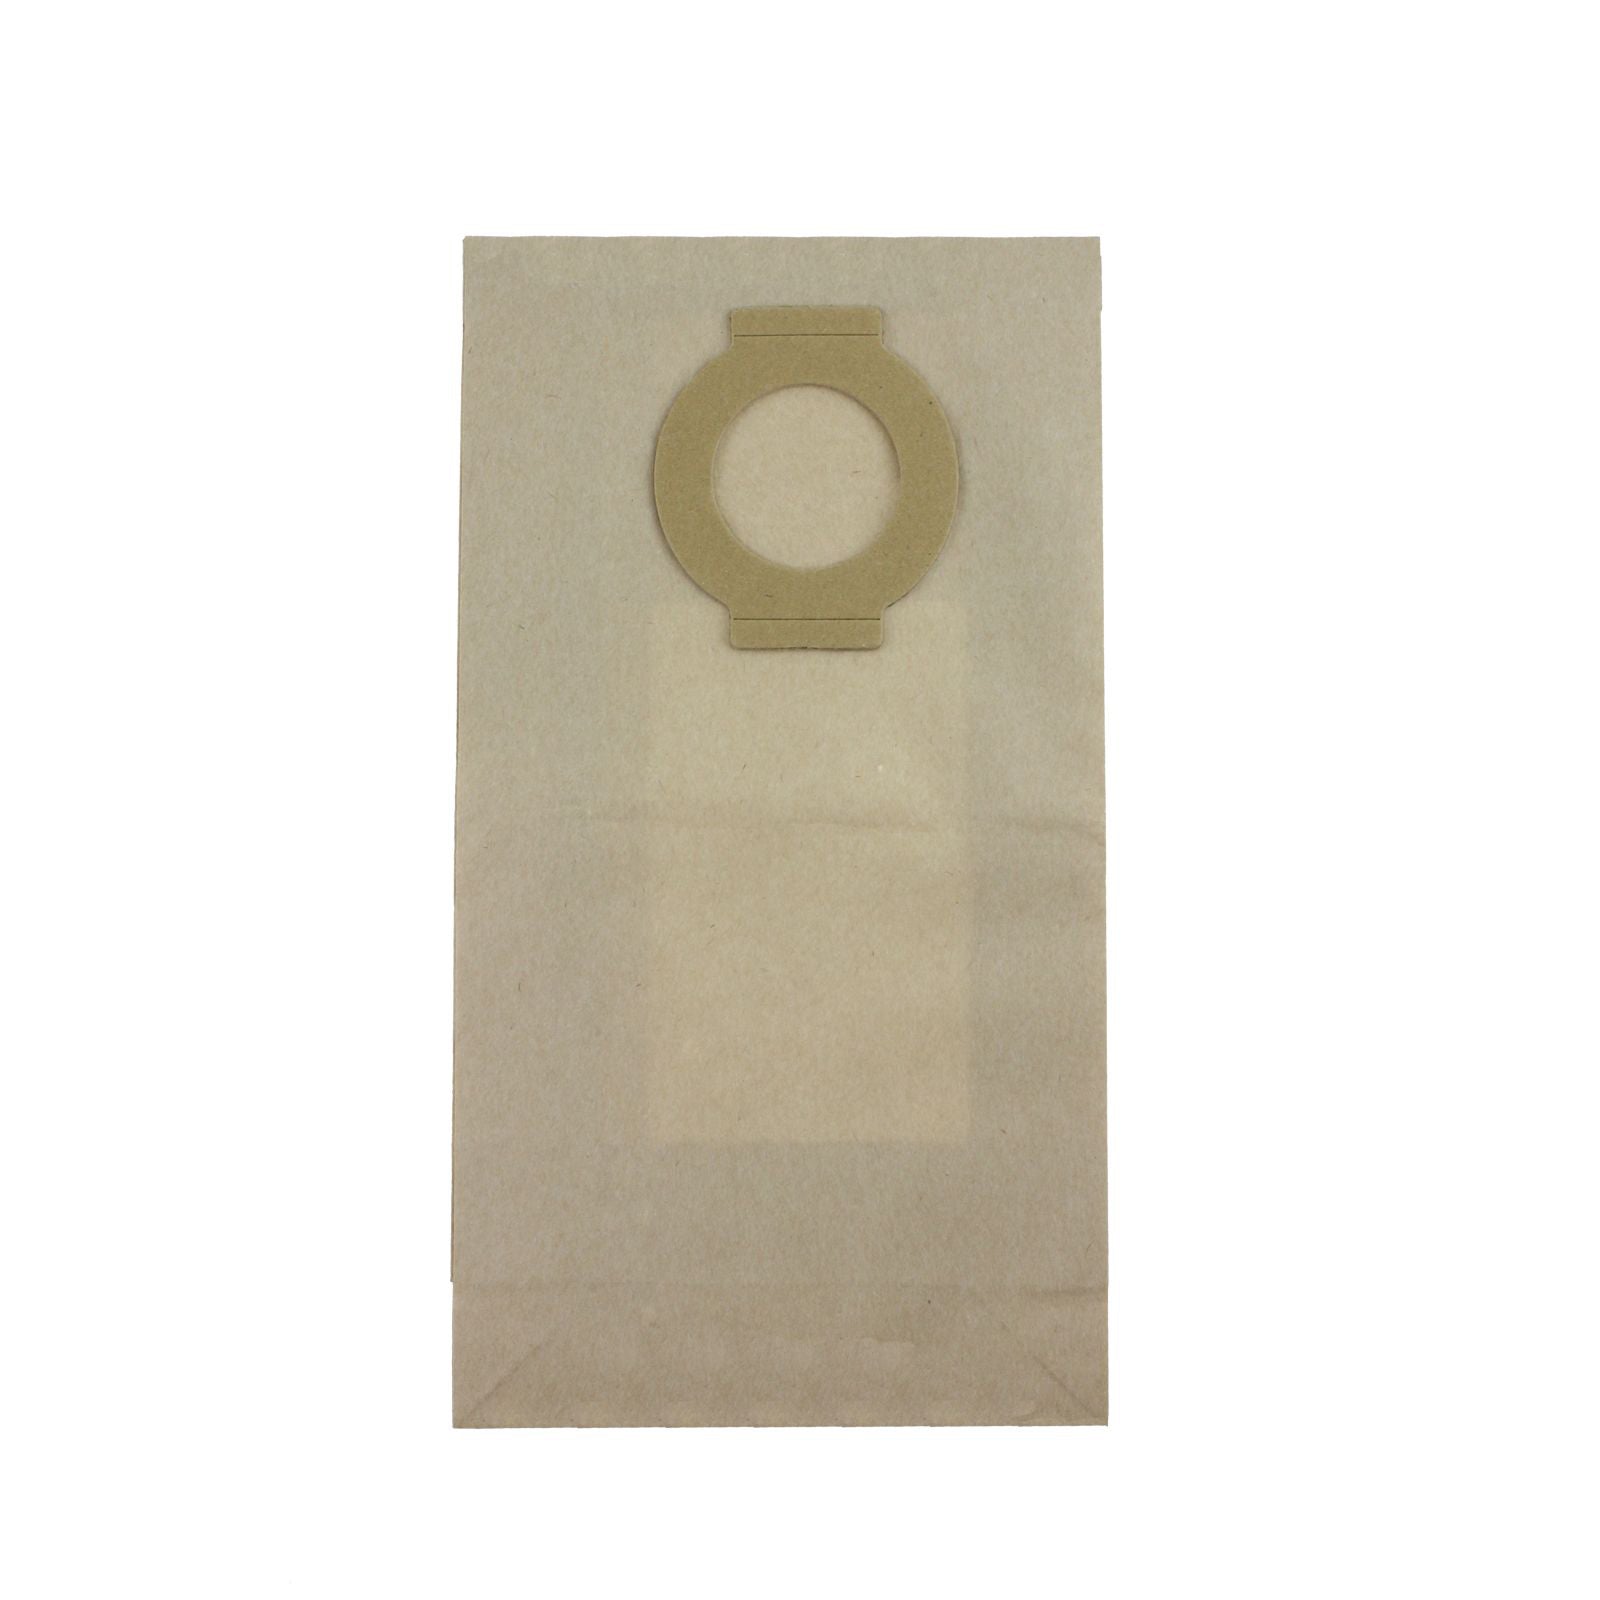 Vacuum Cleaner Dust Bags x 20 compatible with Hoover vacuum cleaner